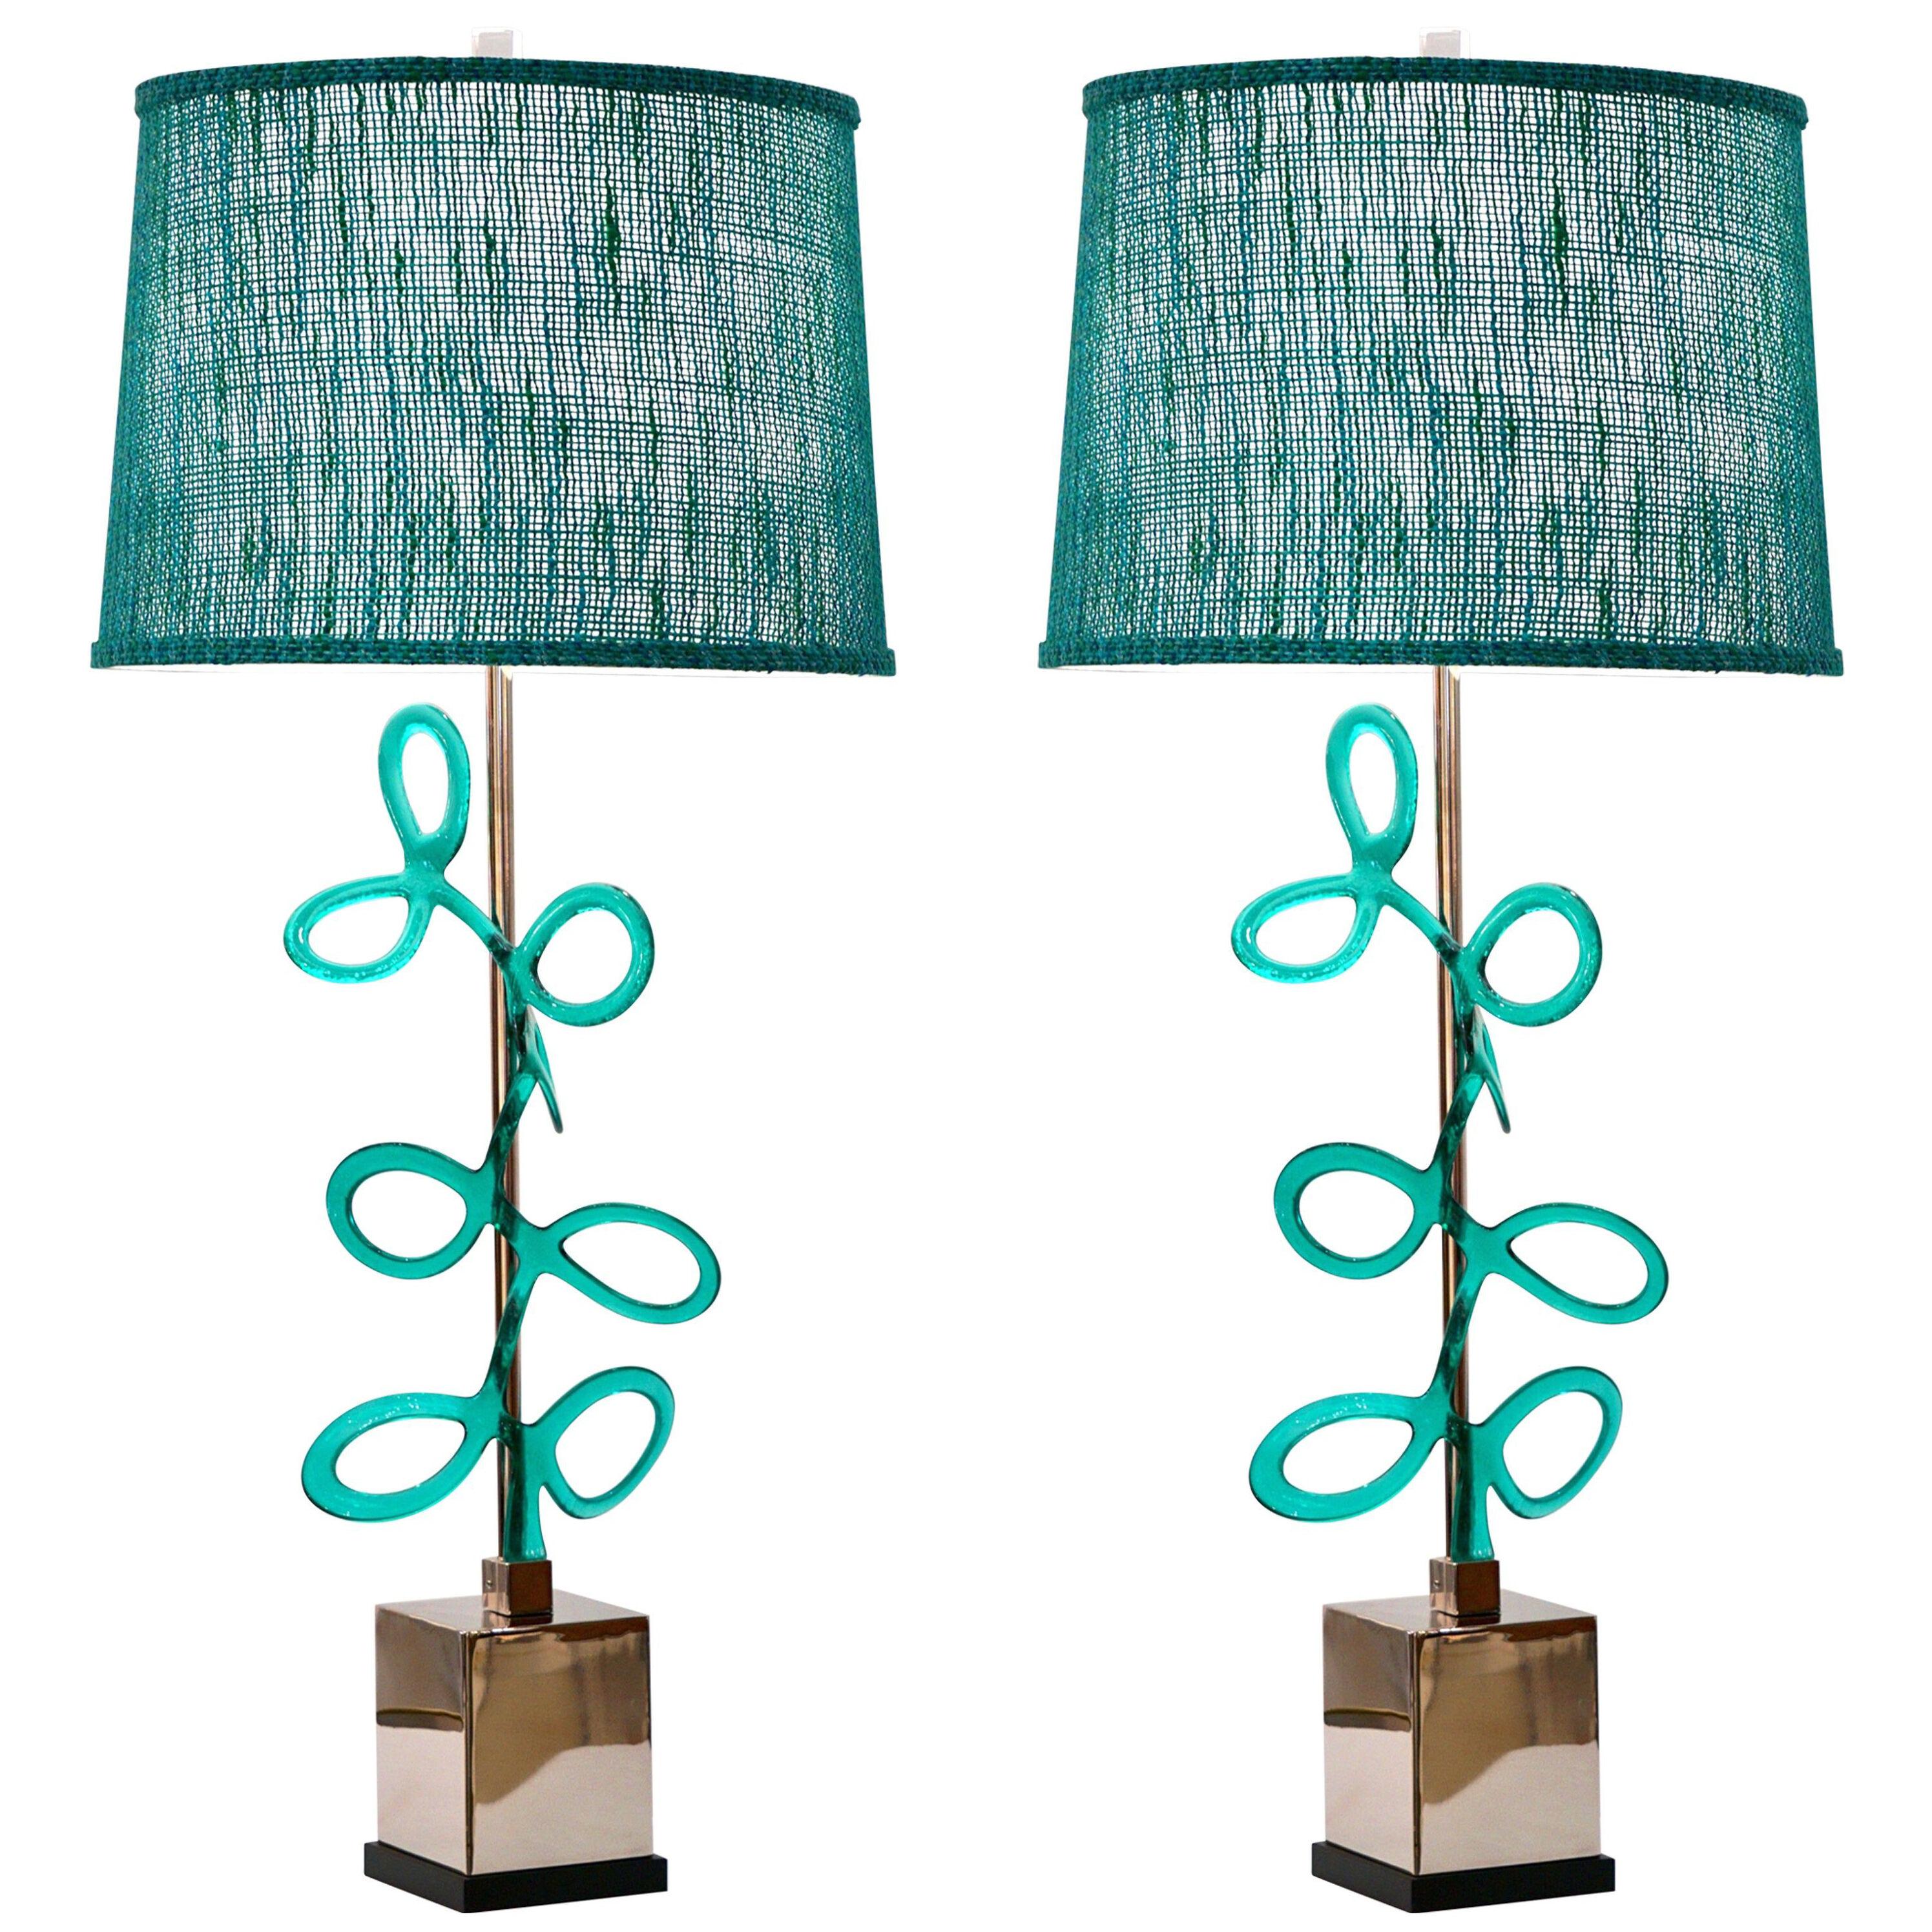 Italian Pair of Silver Color Nickel Lamps with Aqua Blue Murano Glass Swirls